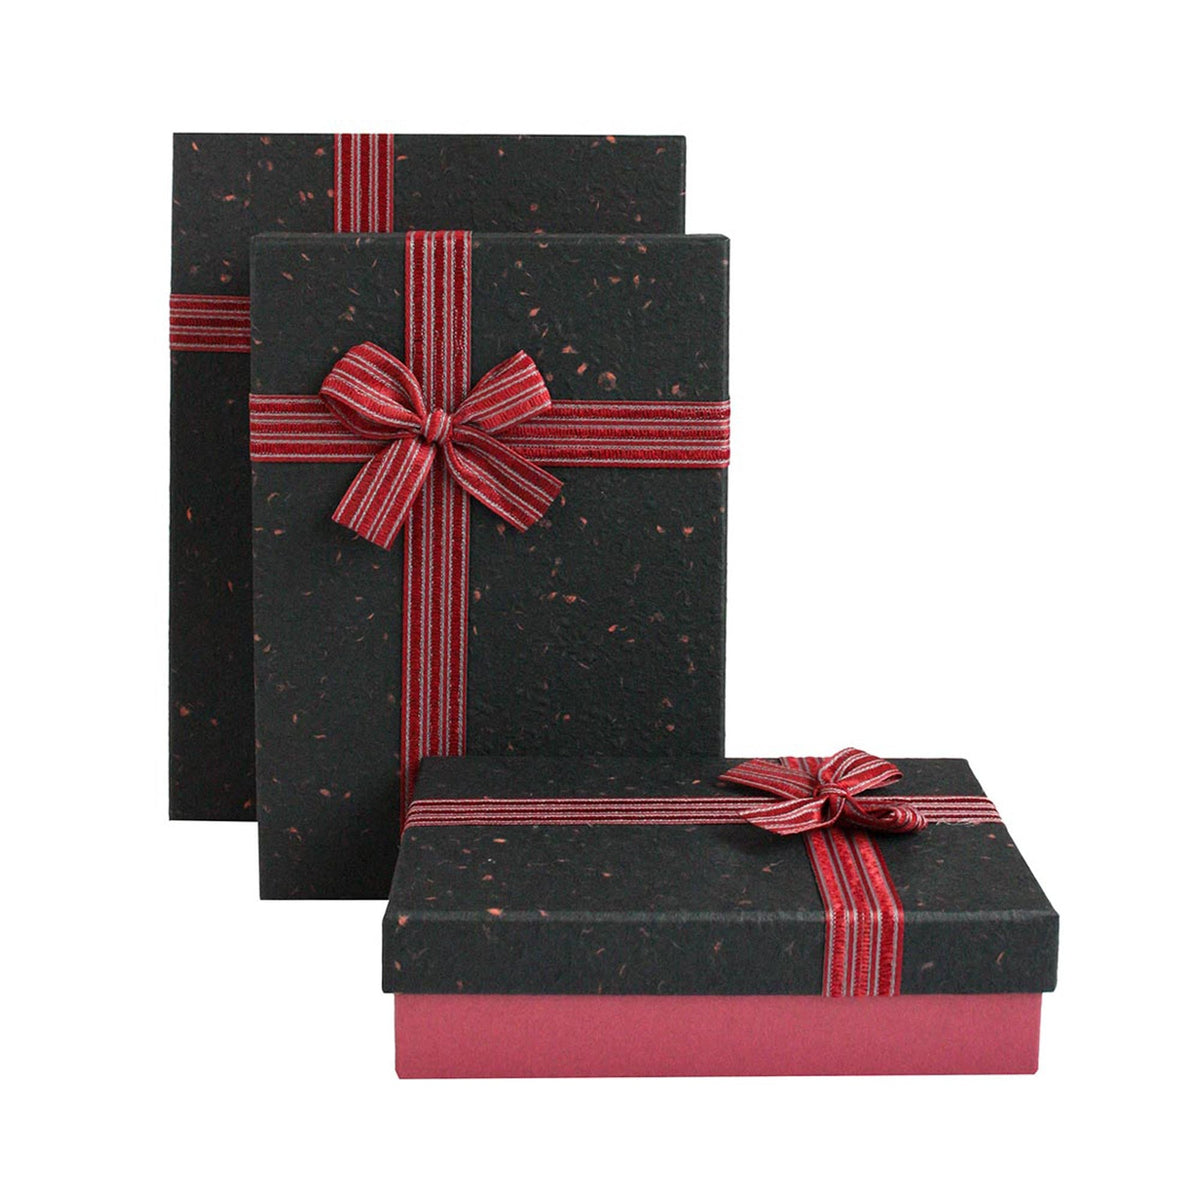 Set of 3 Textured Burgundy Box with Black